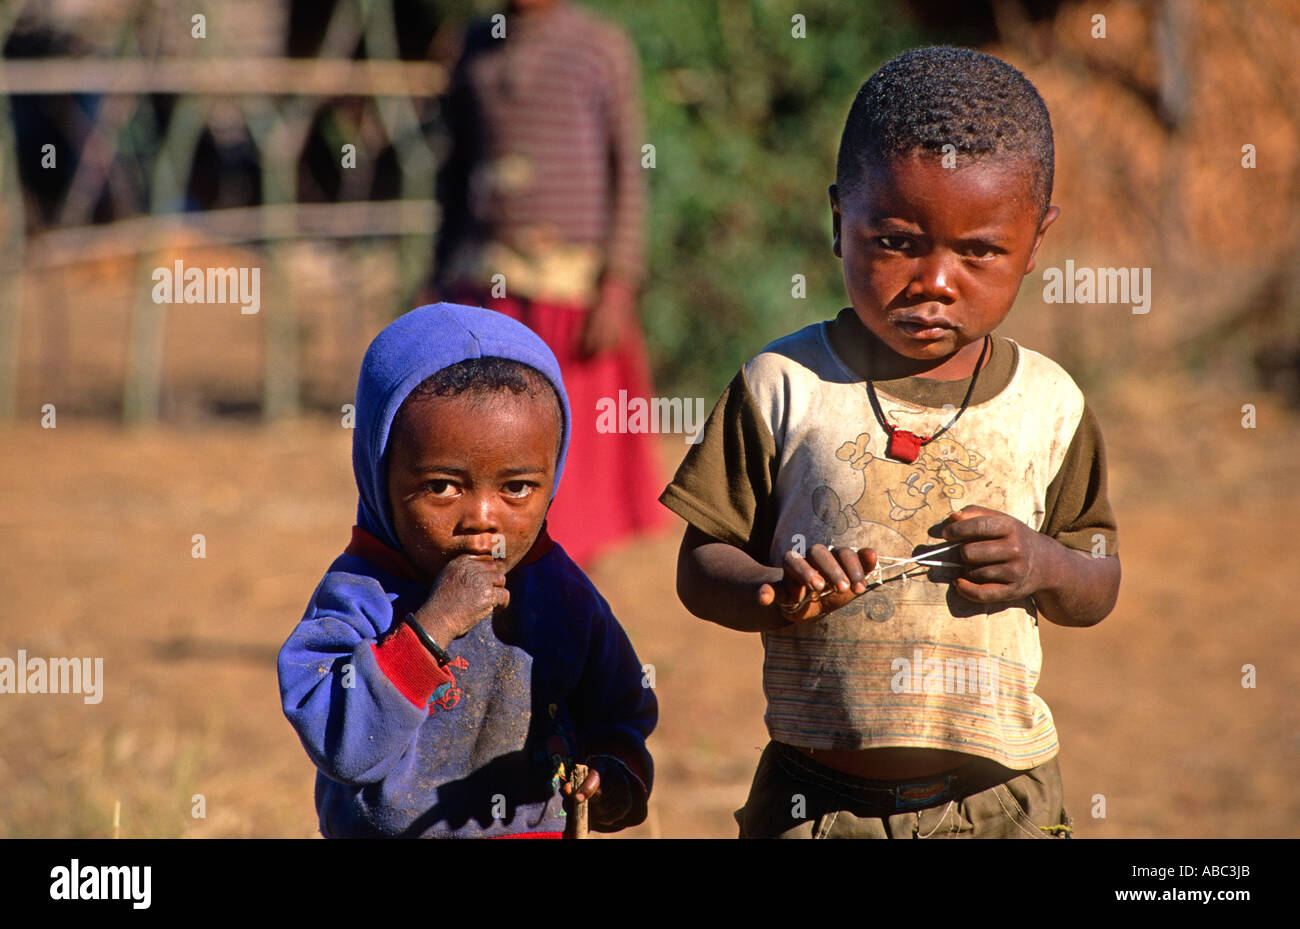 Childs on the countryside, Madagascar Stock Photo